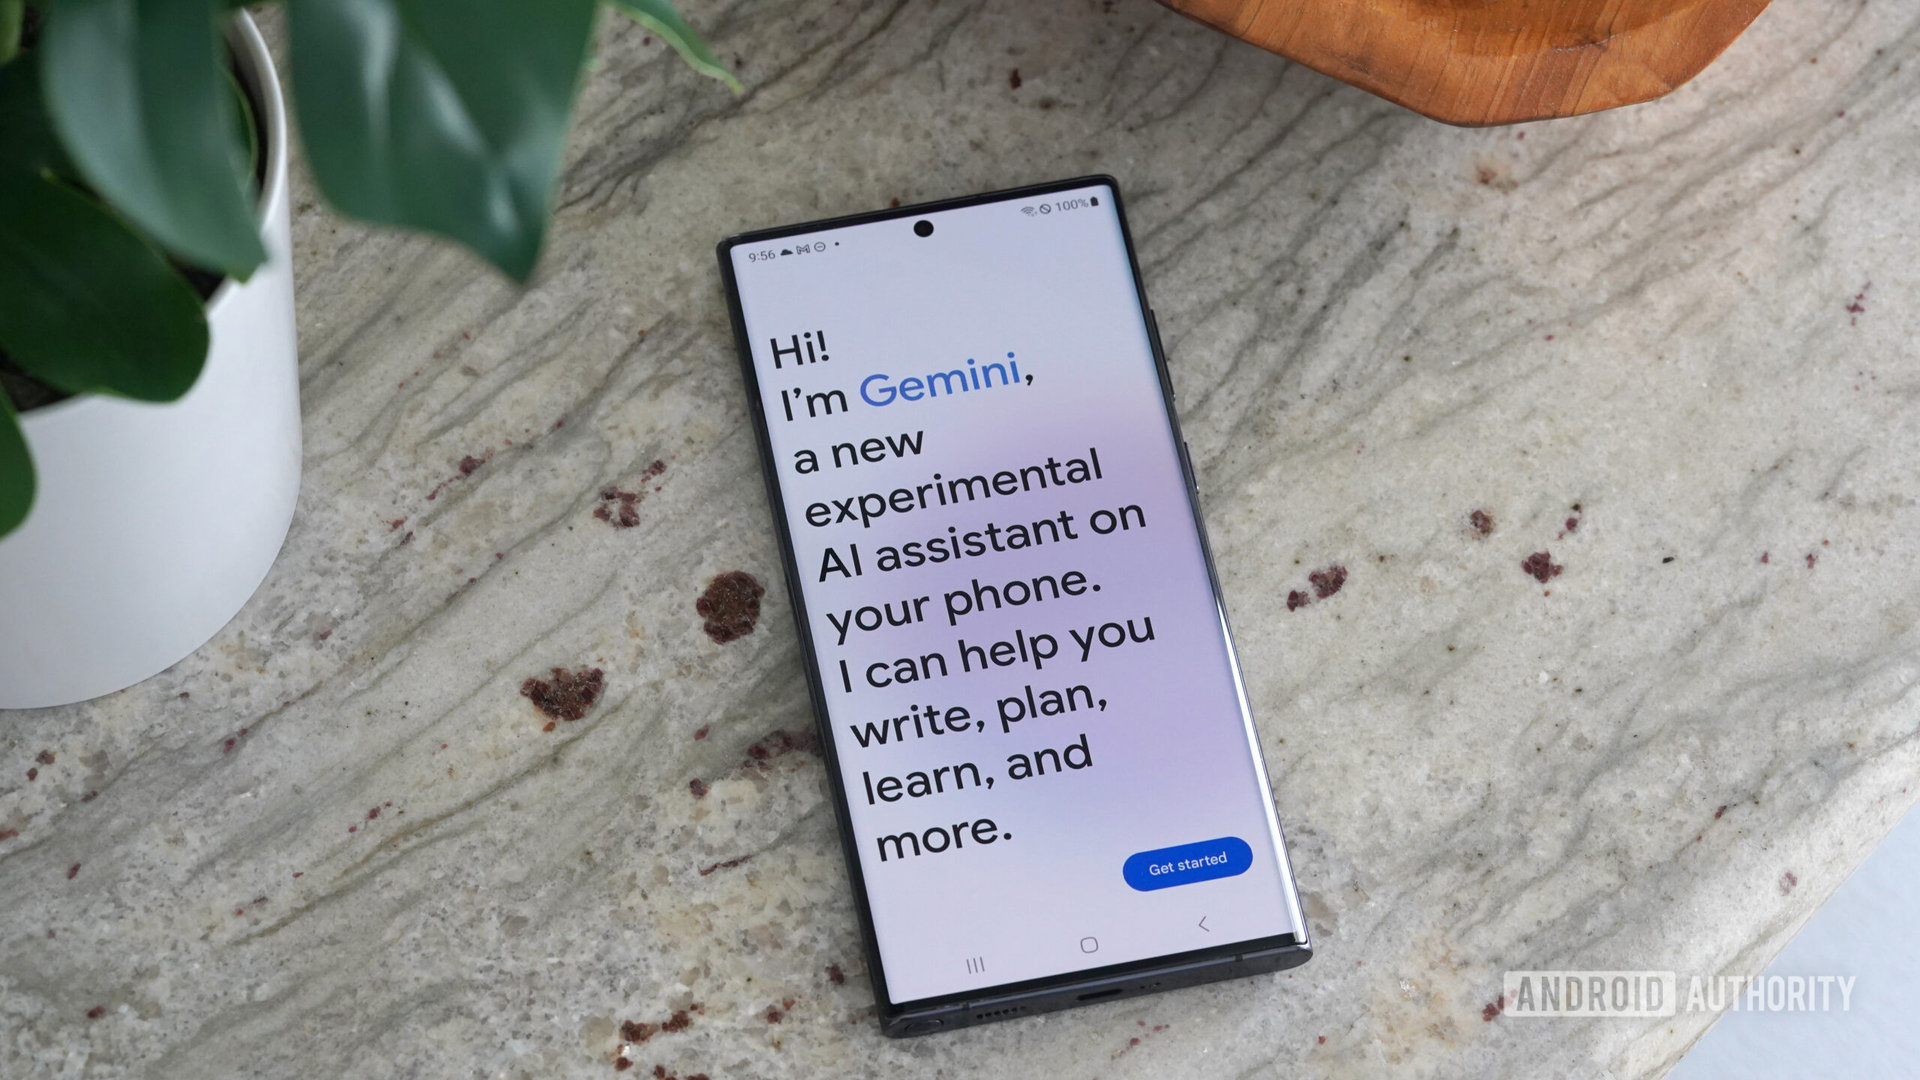 Google's Gemini app open with a greeting from the new AI assistant.